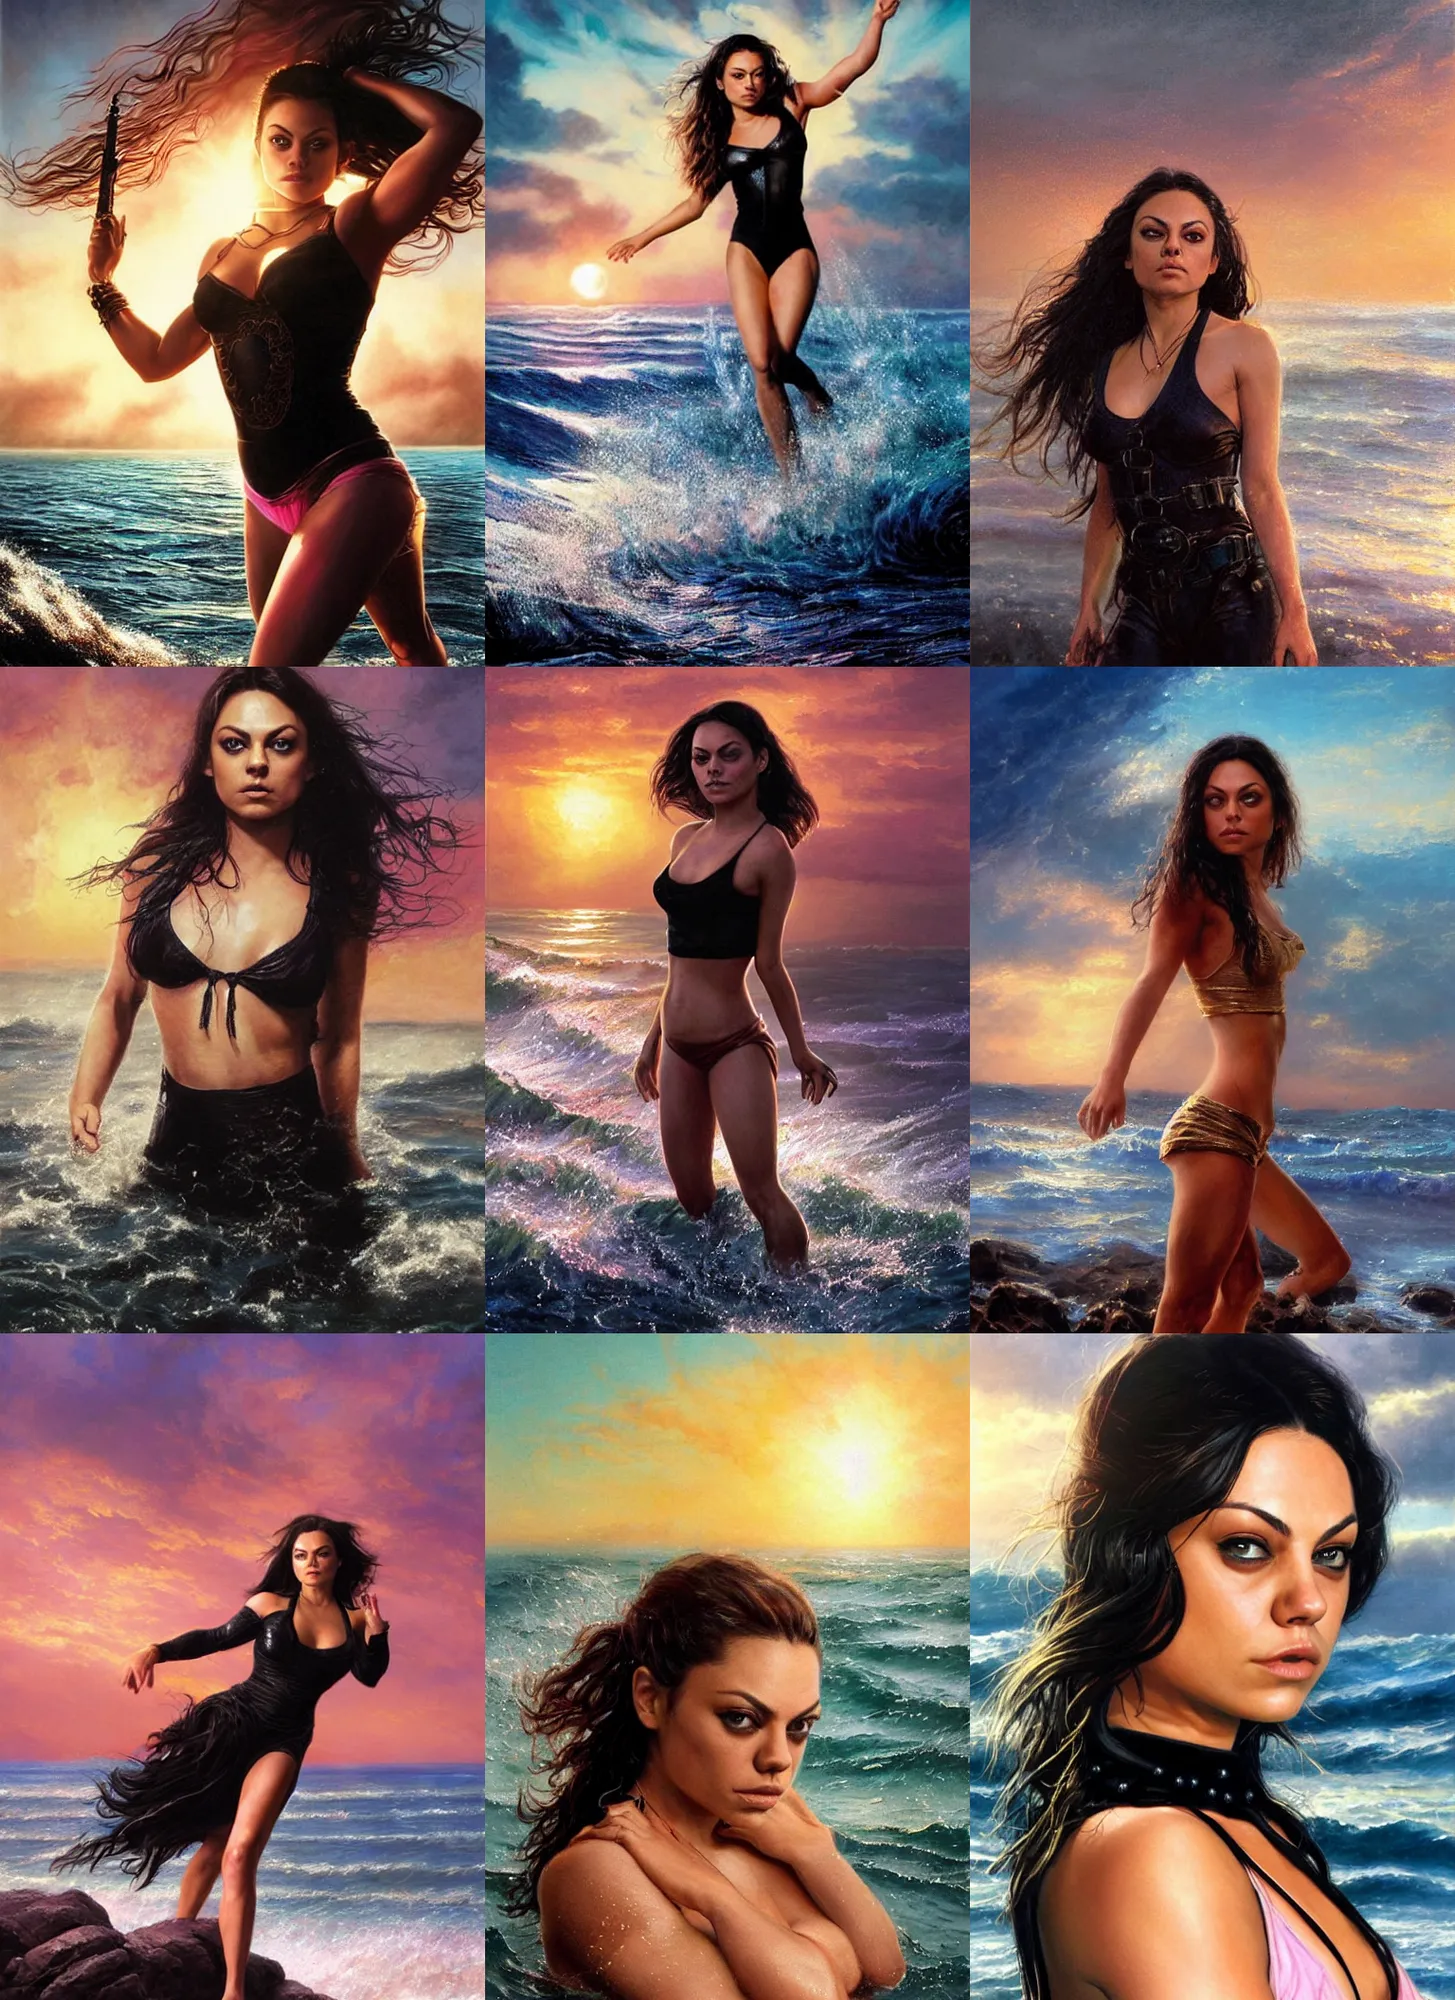 Prompt: Mila Kunis wearing black choker, epic portrait of a very strong muscled Amazon heroine, sun beams across sky, pink golden hour, six-pack, stormy coast, elegant dolphins jumping from the water, intricate, highly detailed, shallow depth of field, epic vista, Ralph Horsley, Daniel F. Gerhartz, Artgerm, Boris Villajo, Lilia Alvarado